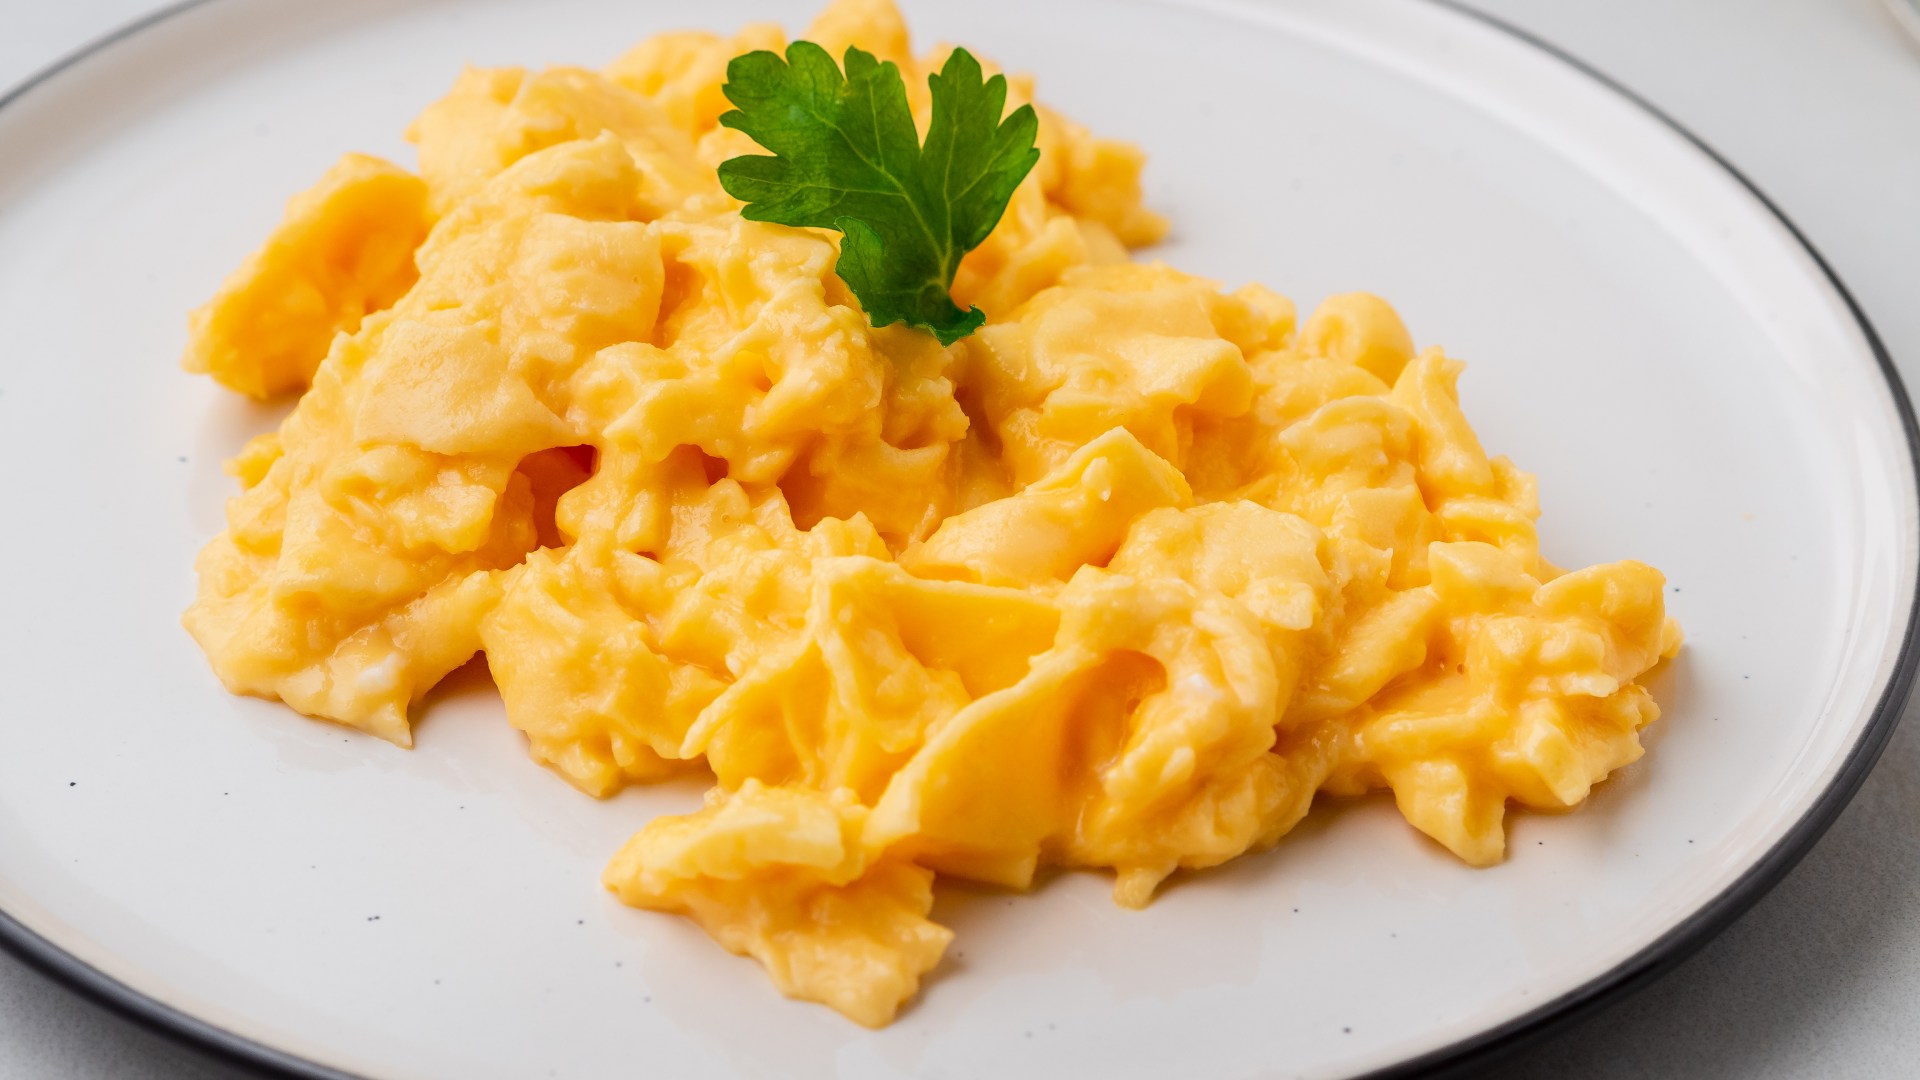 Outrageous London Restaurant Sells Scrambled Eggs on Toast for £58 – Diners Fume at Posh Price Tag